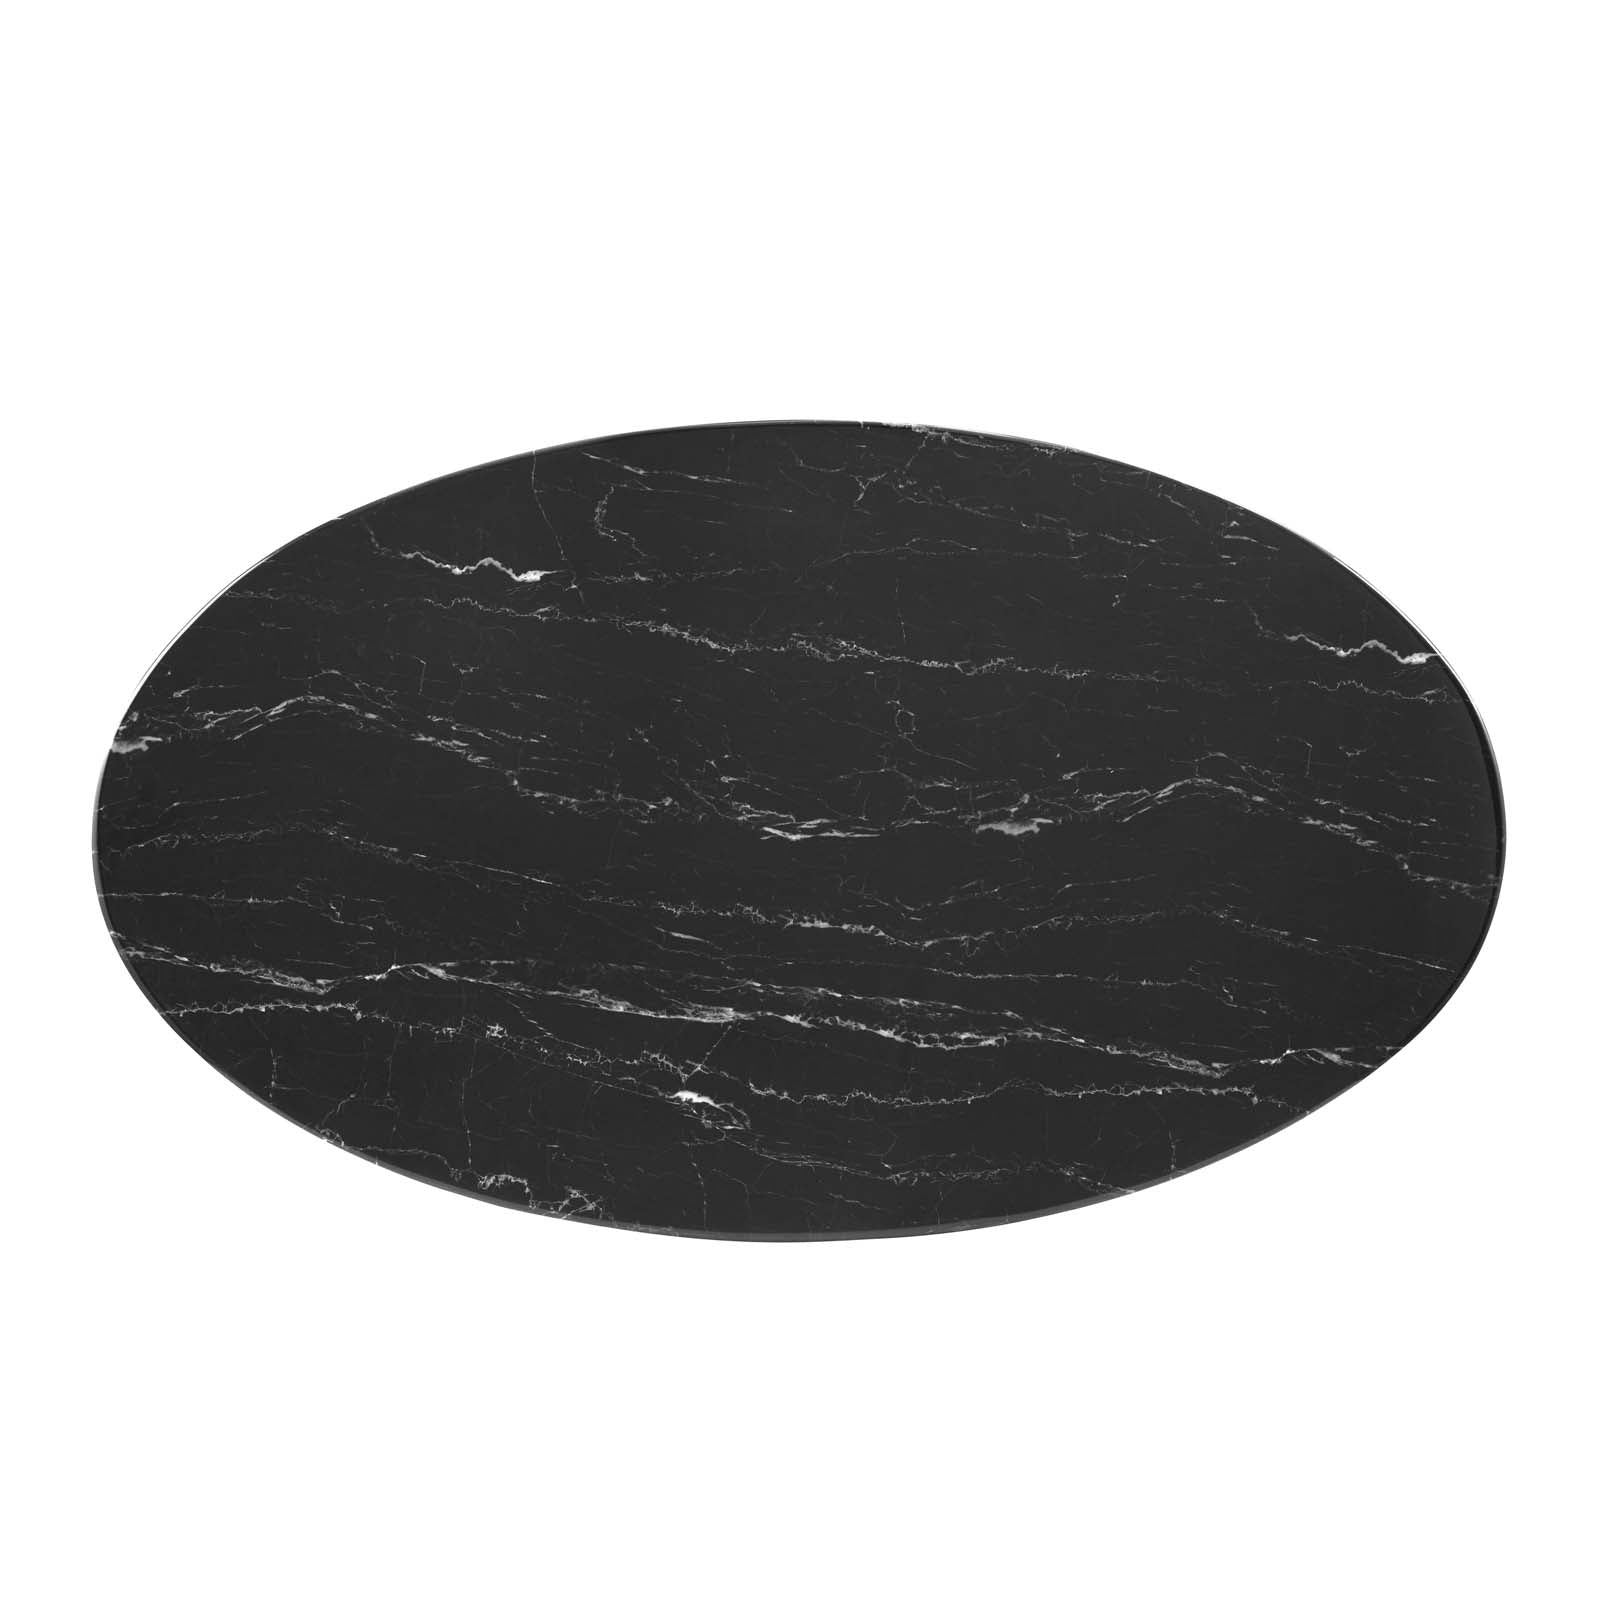 Modway Dining Tables - Tupelo-48"-Oval-Artificial-Marble-Dining-Table-Gold-Black